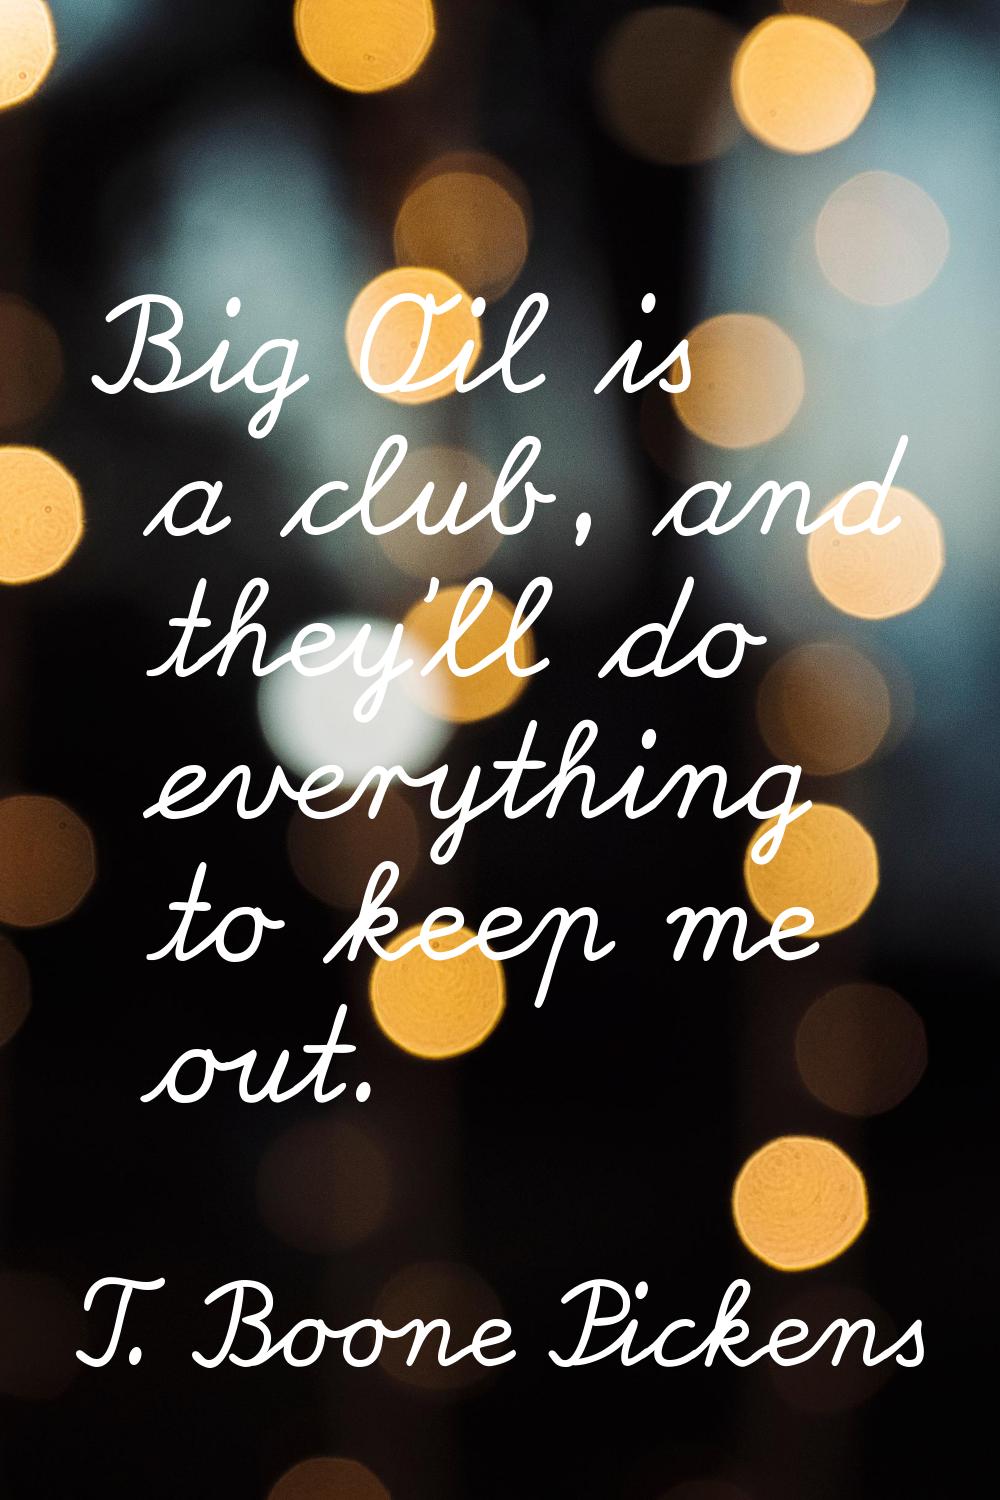 Big Oil is a club, and they'll do everything to keep me out.